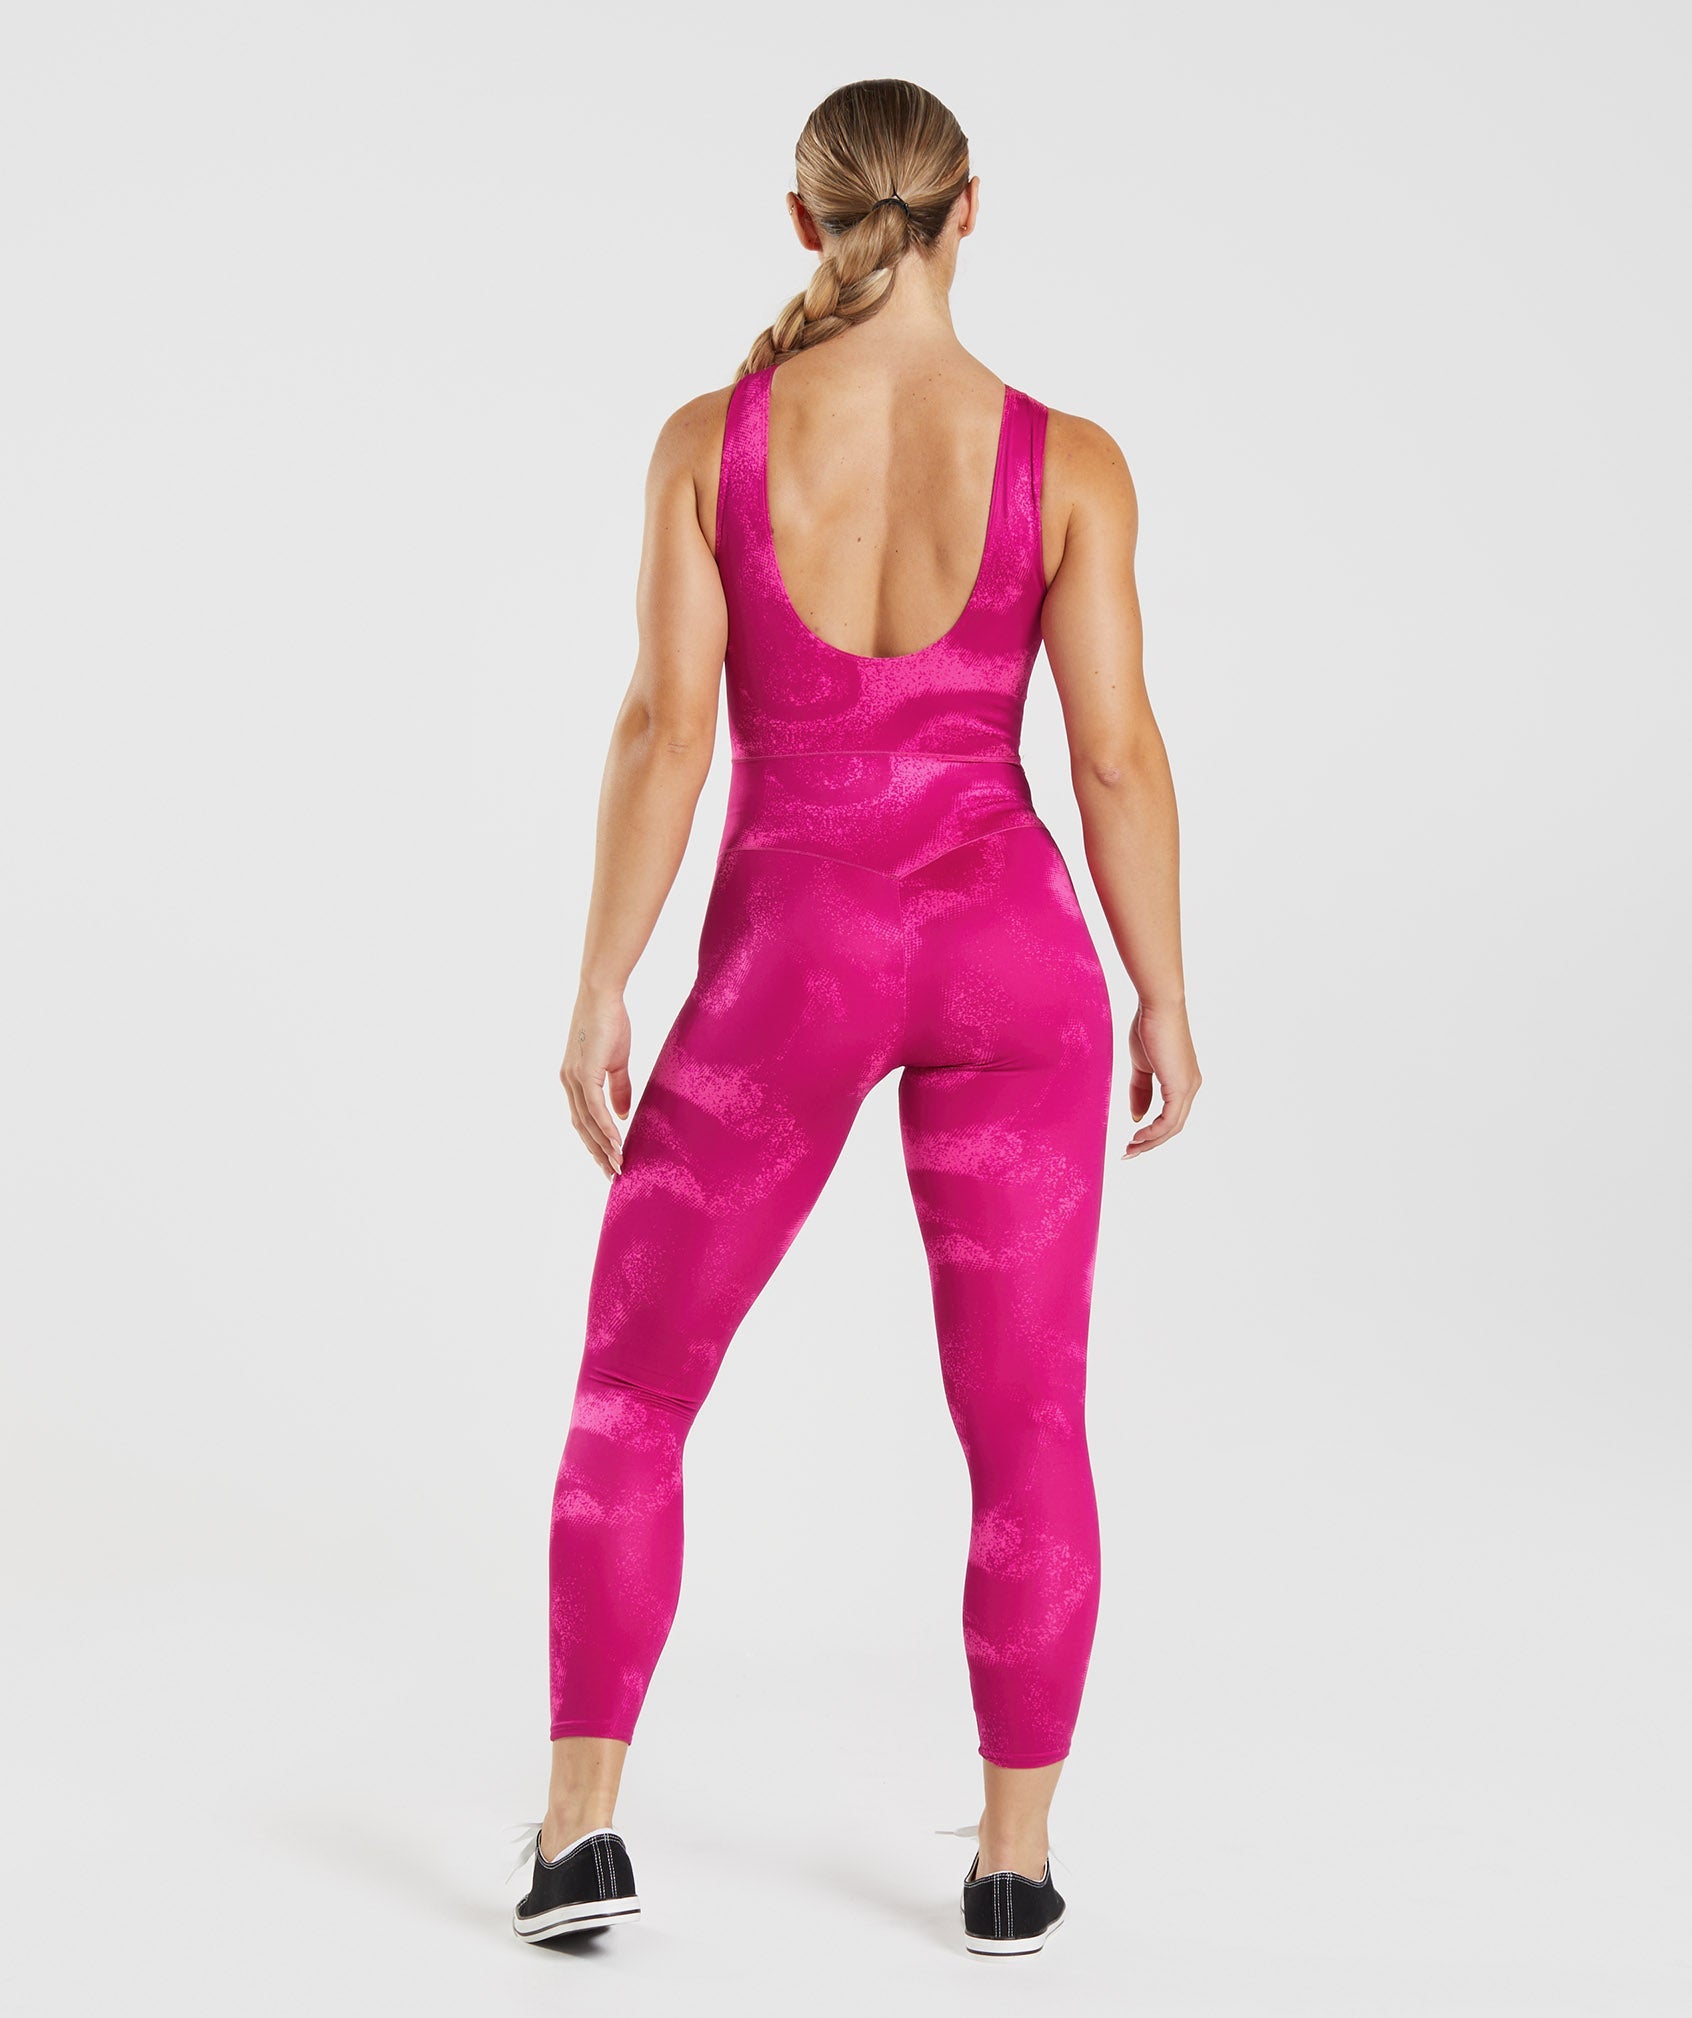 GS Power Full Length All In One in Magenta Pink Print